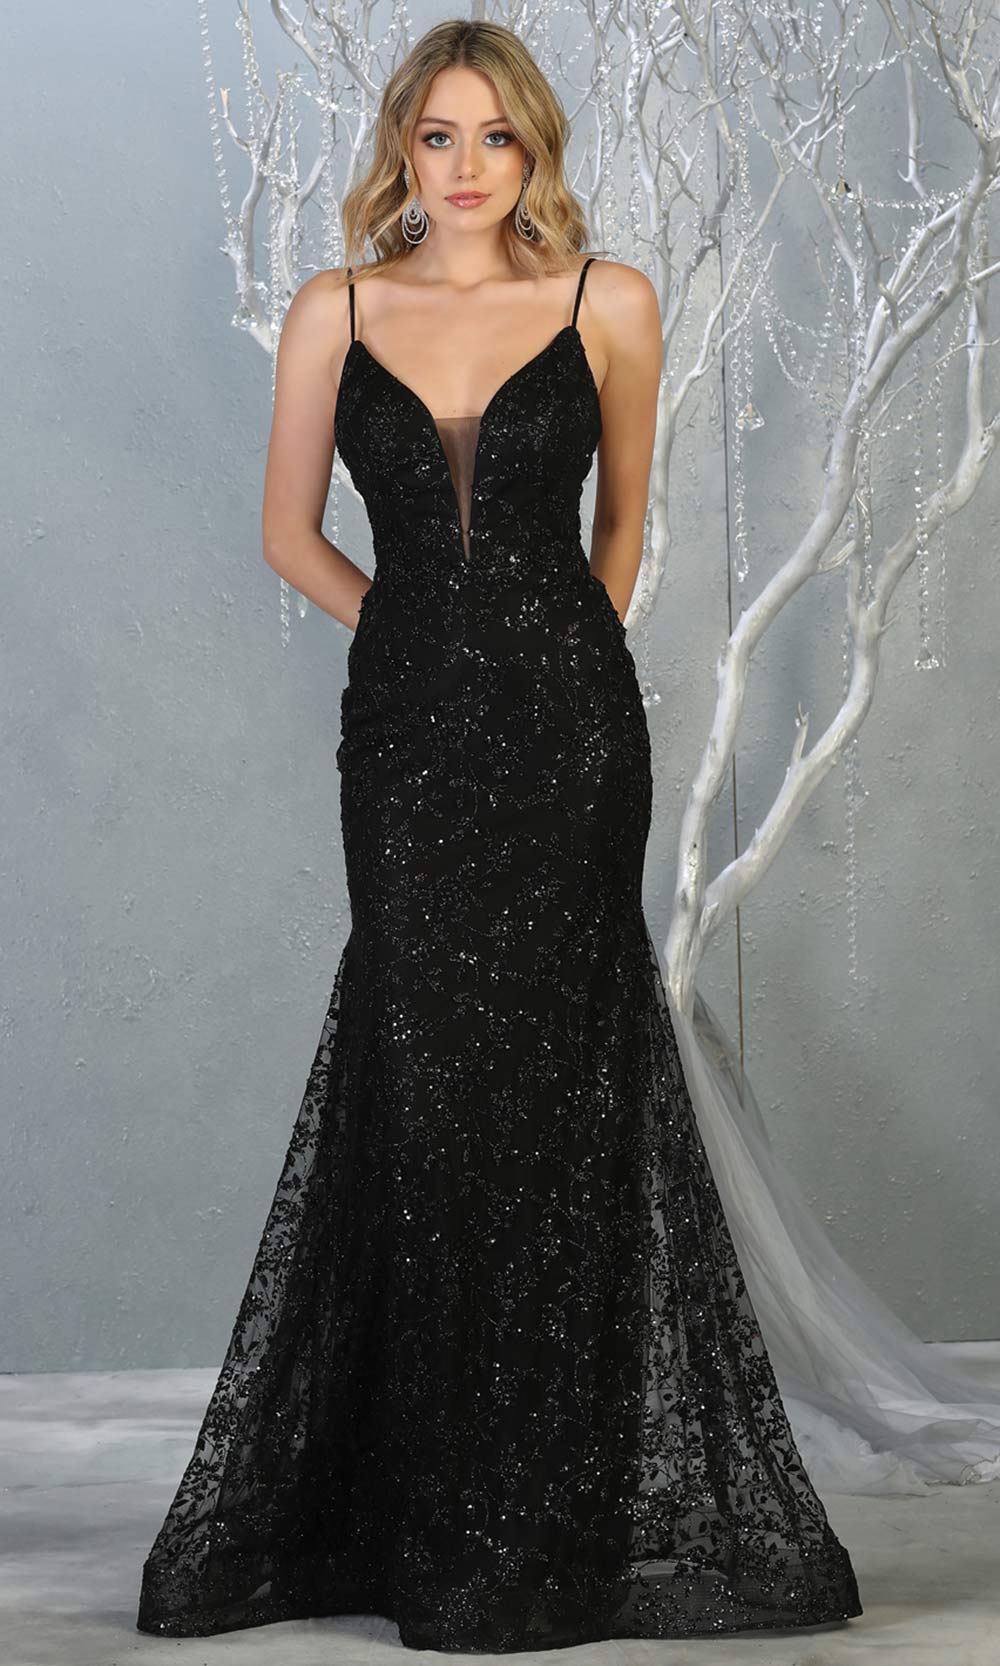 Mayqueen MQ1752 long black sequin evening fitted mermaid dress w/low back. Full length black gown is perfect for enagagement/e-shoot dress, wedding reception dress, indowestern gown, formal evening party dress, prom. Plus sizes avail.jpg